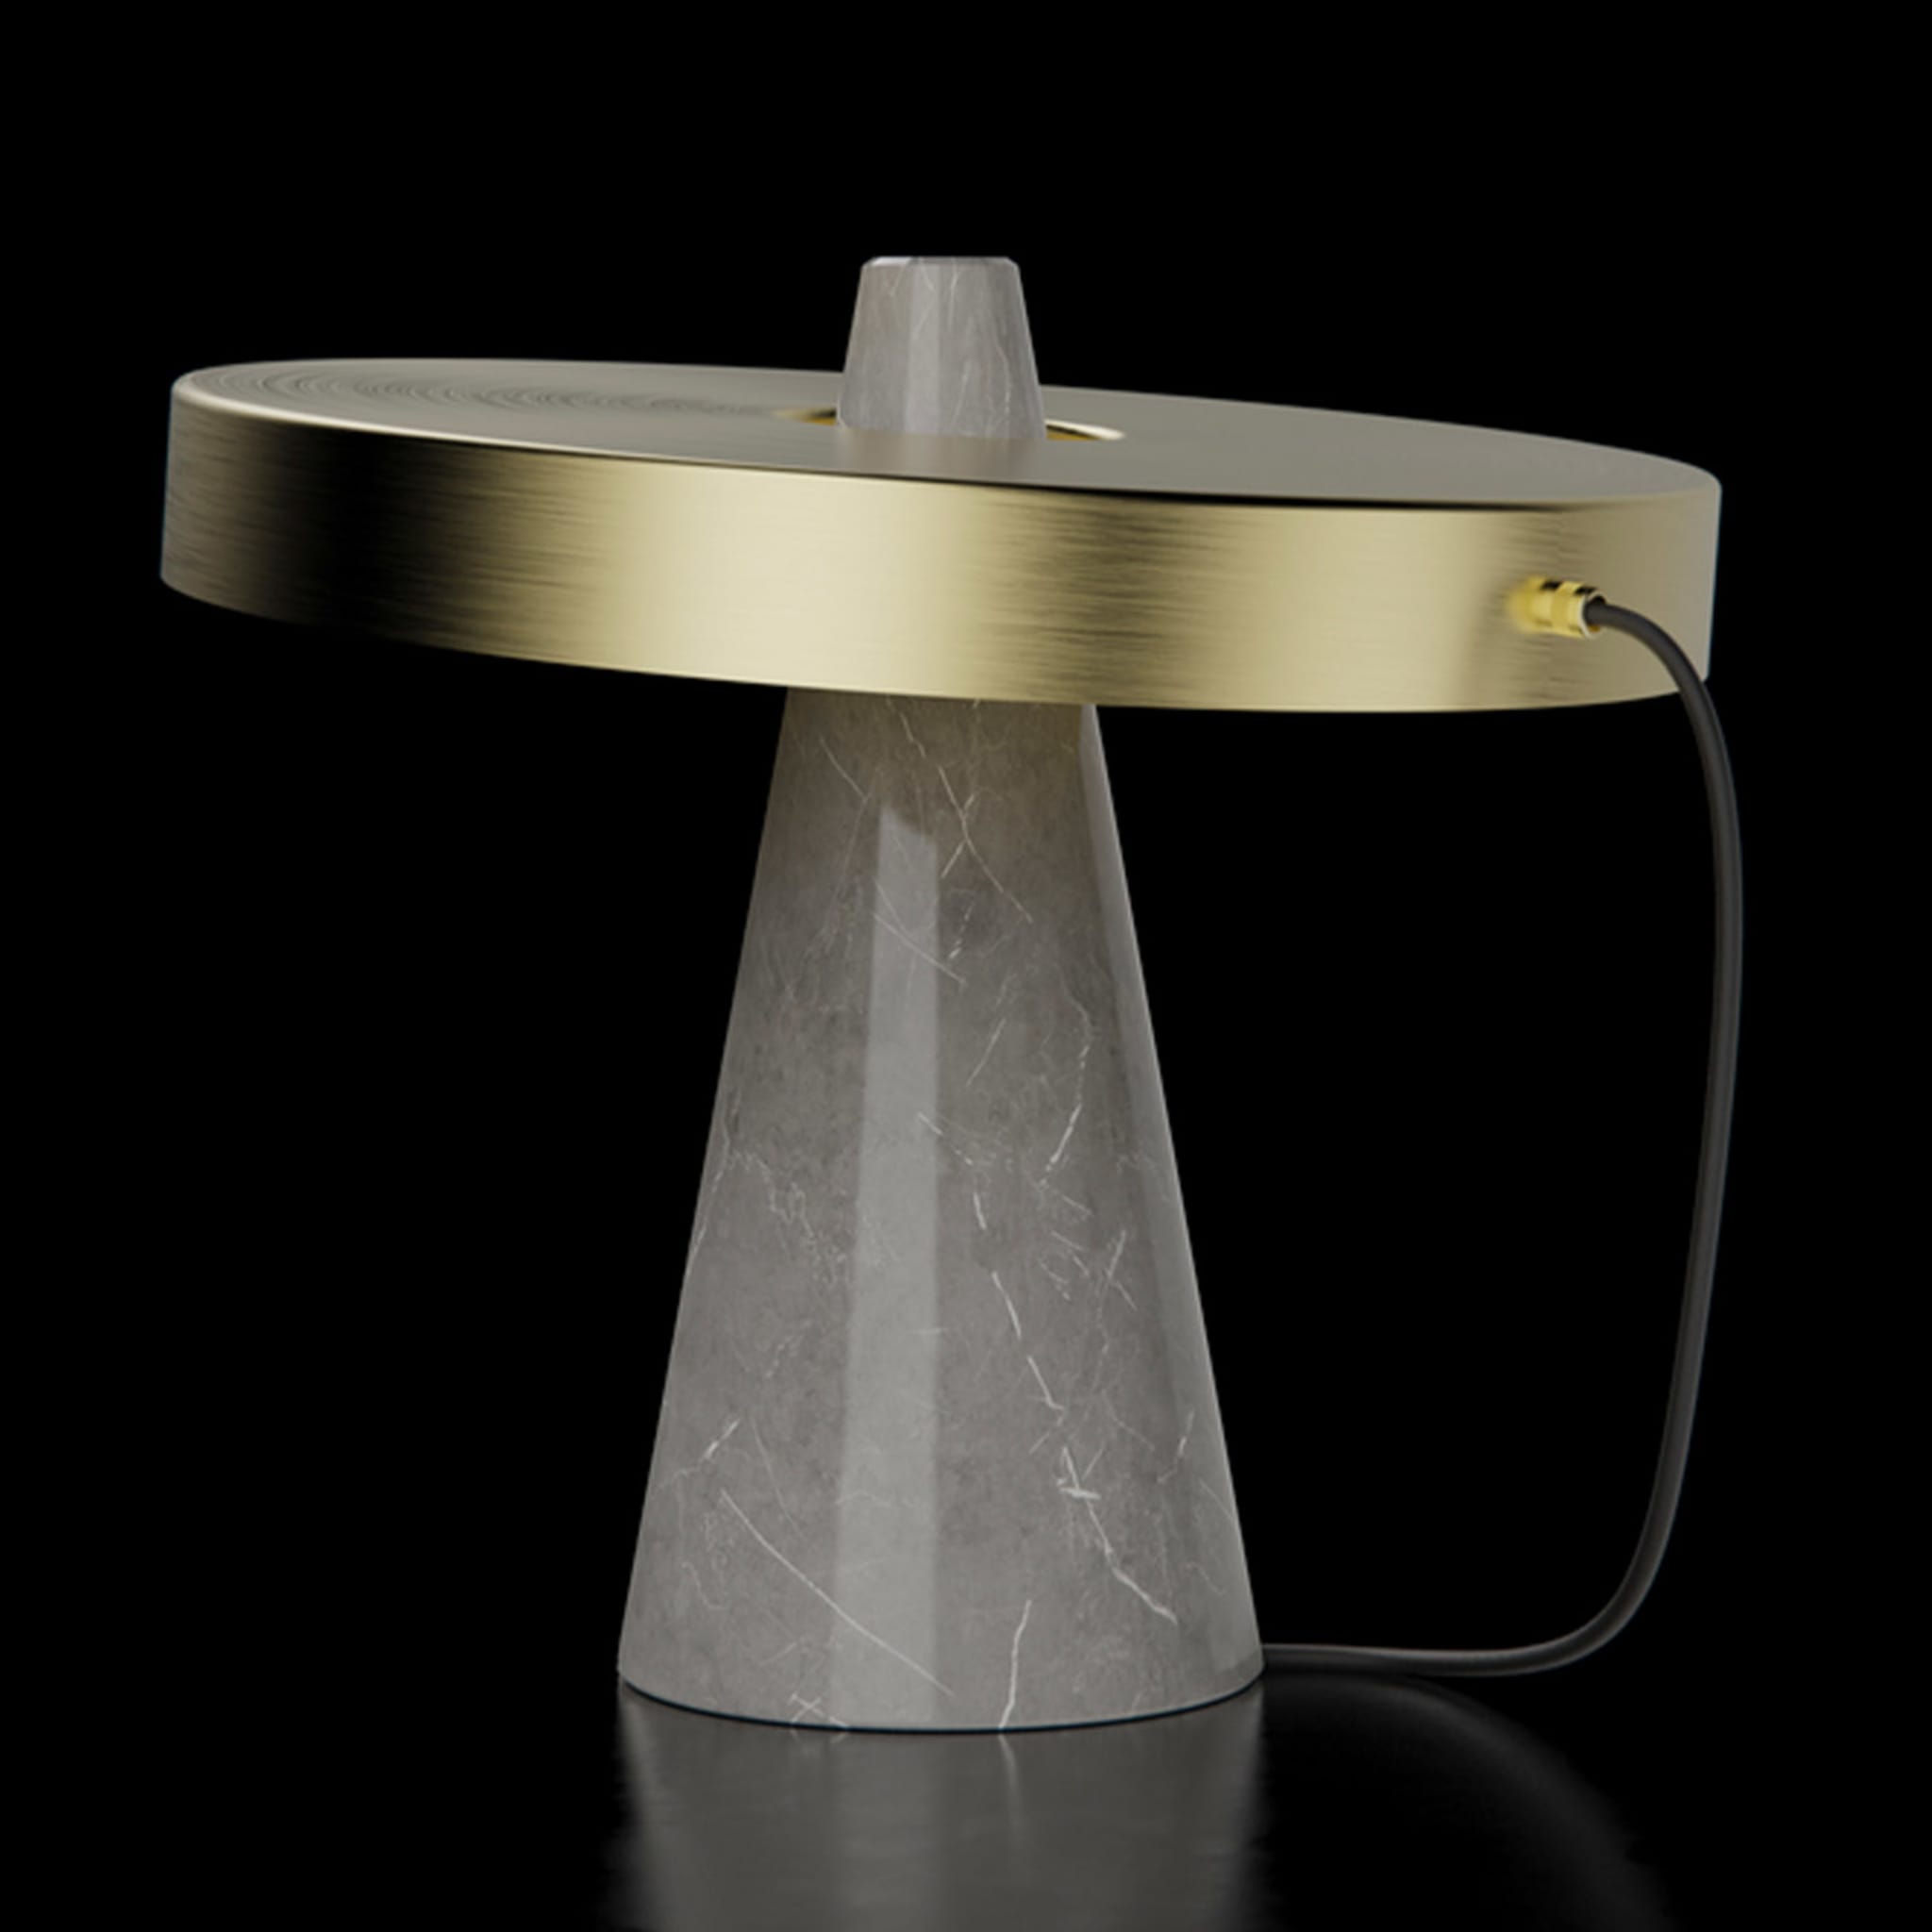 ED039 Grey Stone and Brass Table Lamp - Alternative view 2